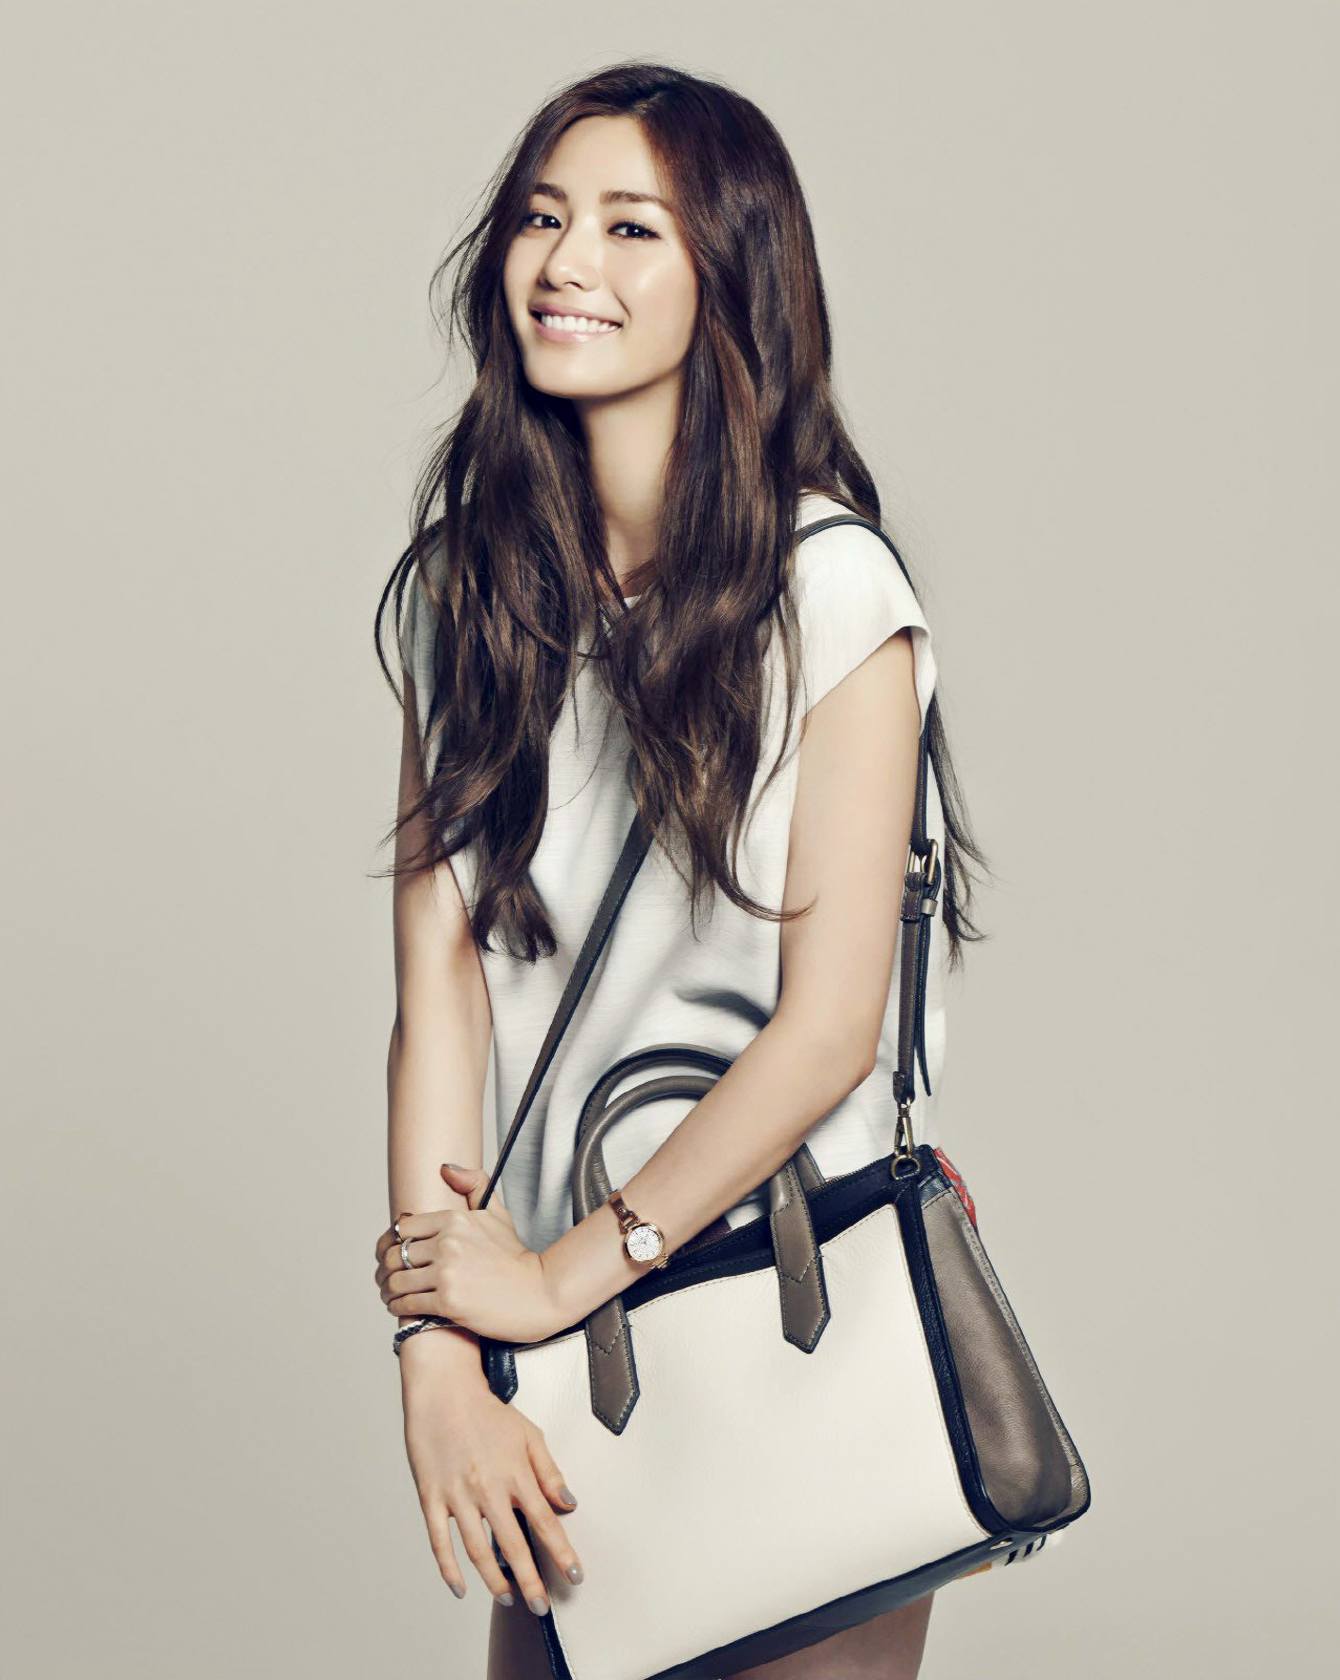 Nana Profile: Actress From K-Pop Group AFTER SCHOOL To 